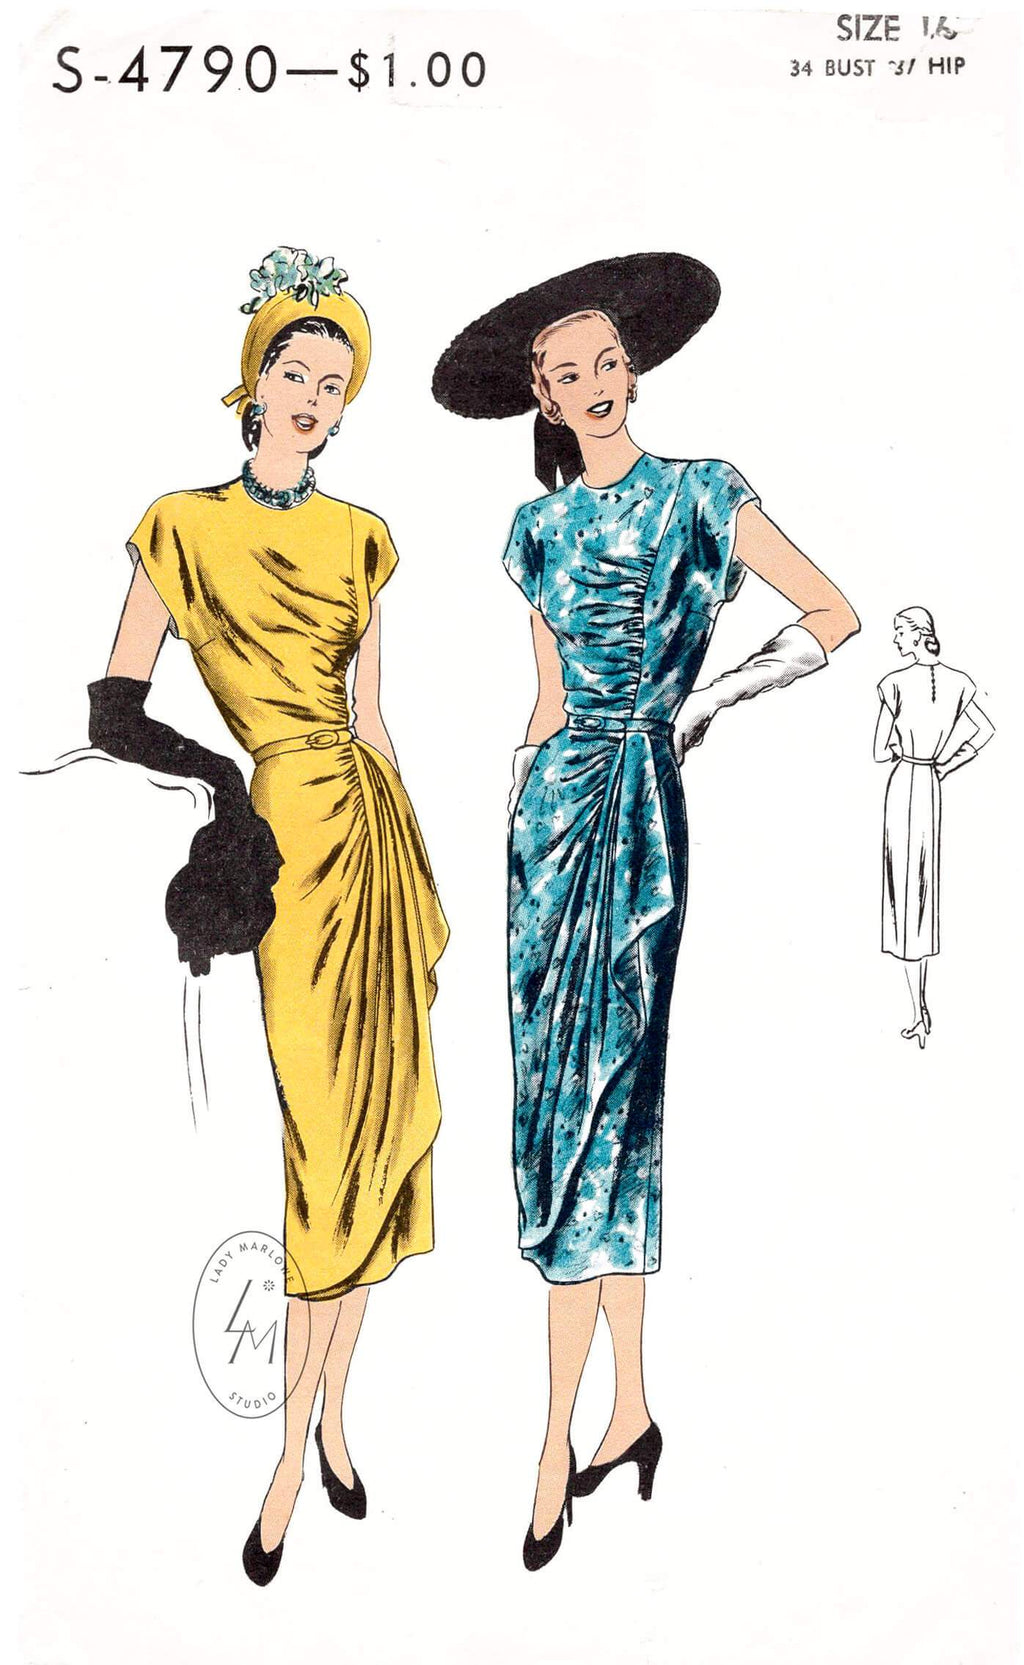 Vogue S-4790 1940s film noir dress with draped skirt front detail vintage sewing pattern repro